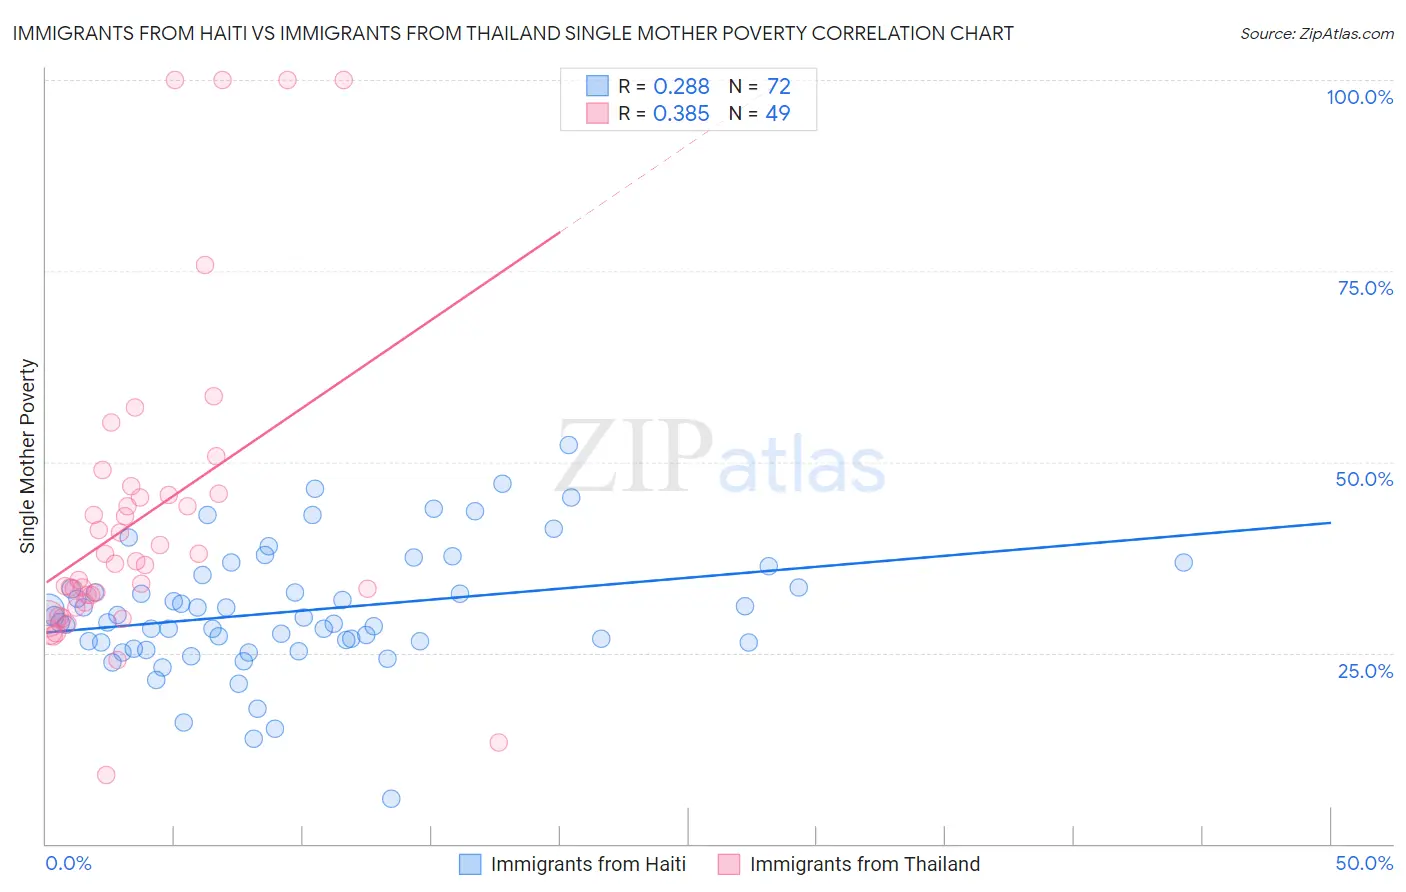 Immigrants from Haiti vs Immigrants from Thailand Single Mother Poverty